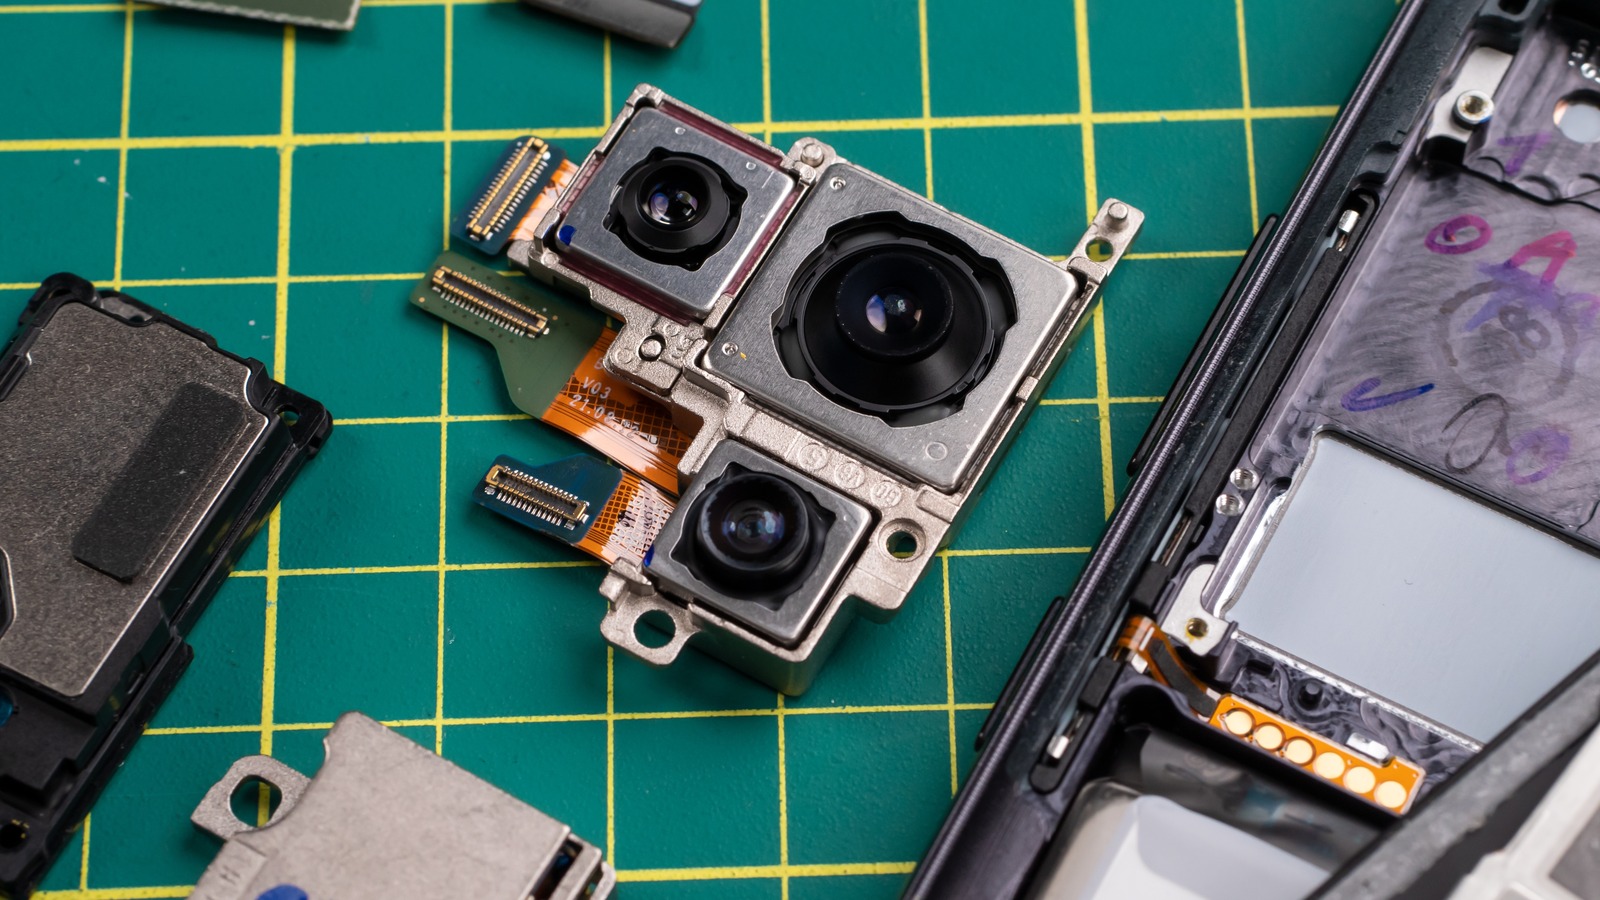 iFixit is sadly ending its partnership with Samsung